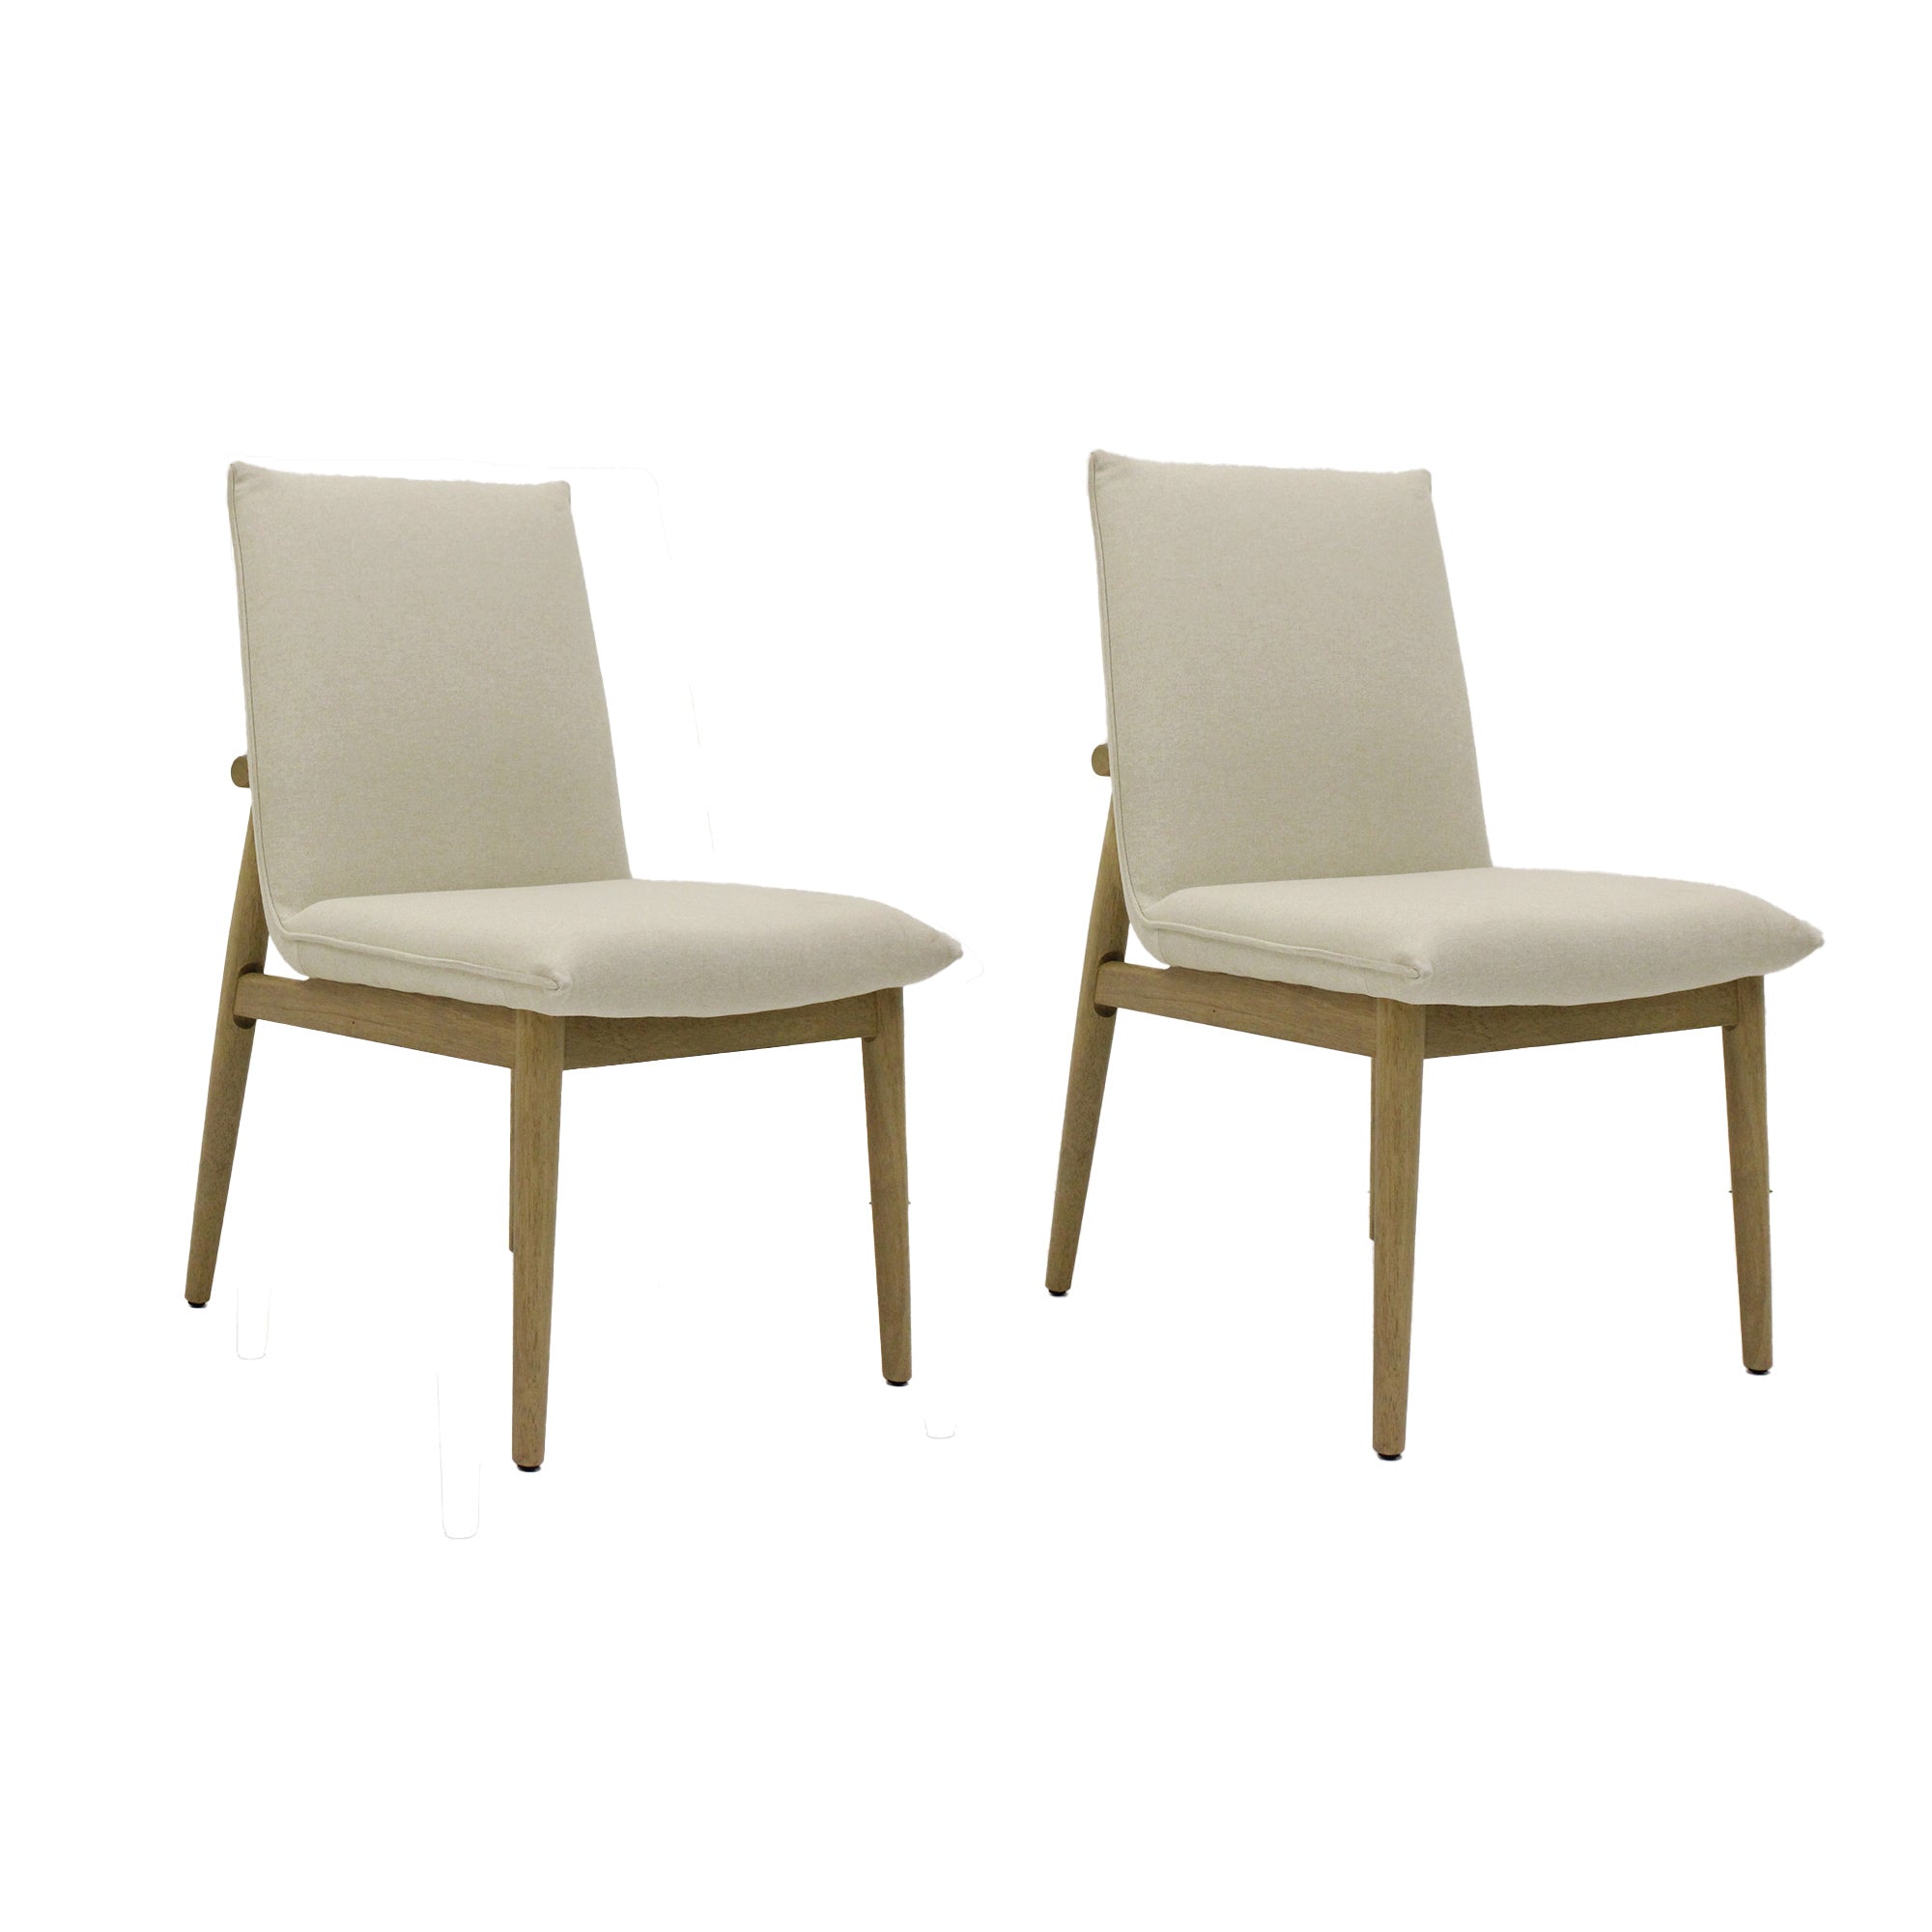 Nova Upholstered Wood Dining Chairs Set of 2